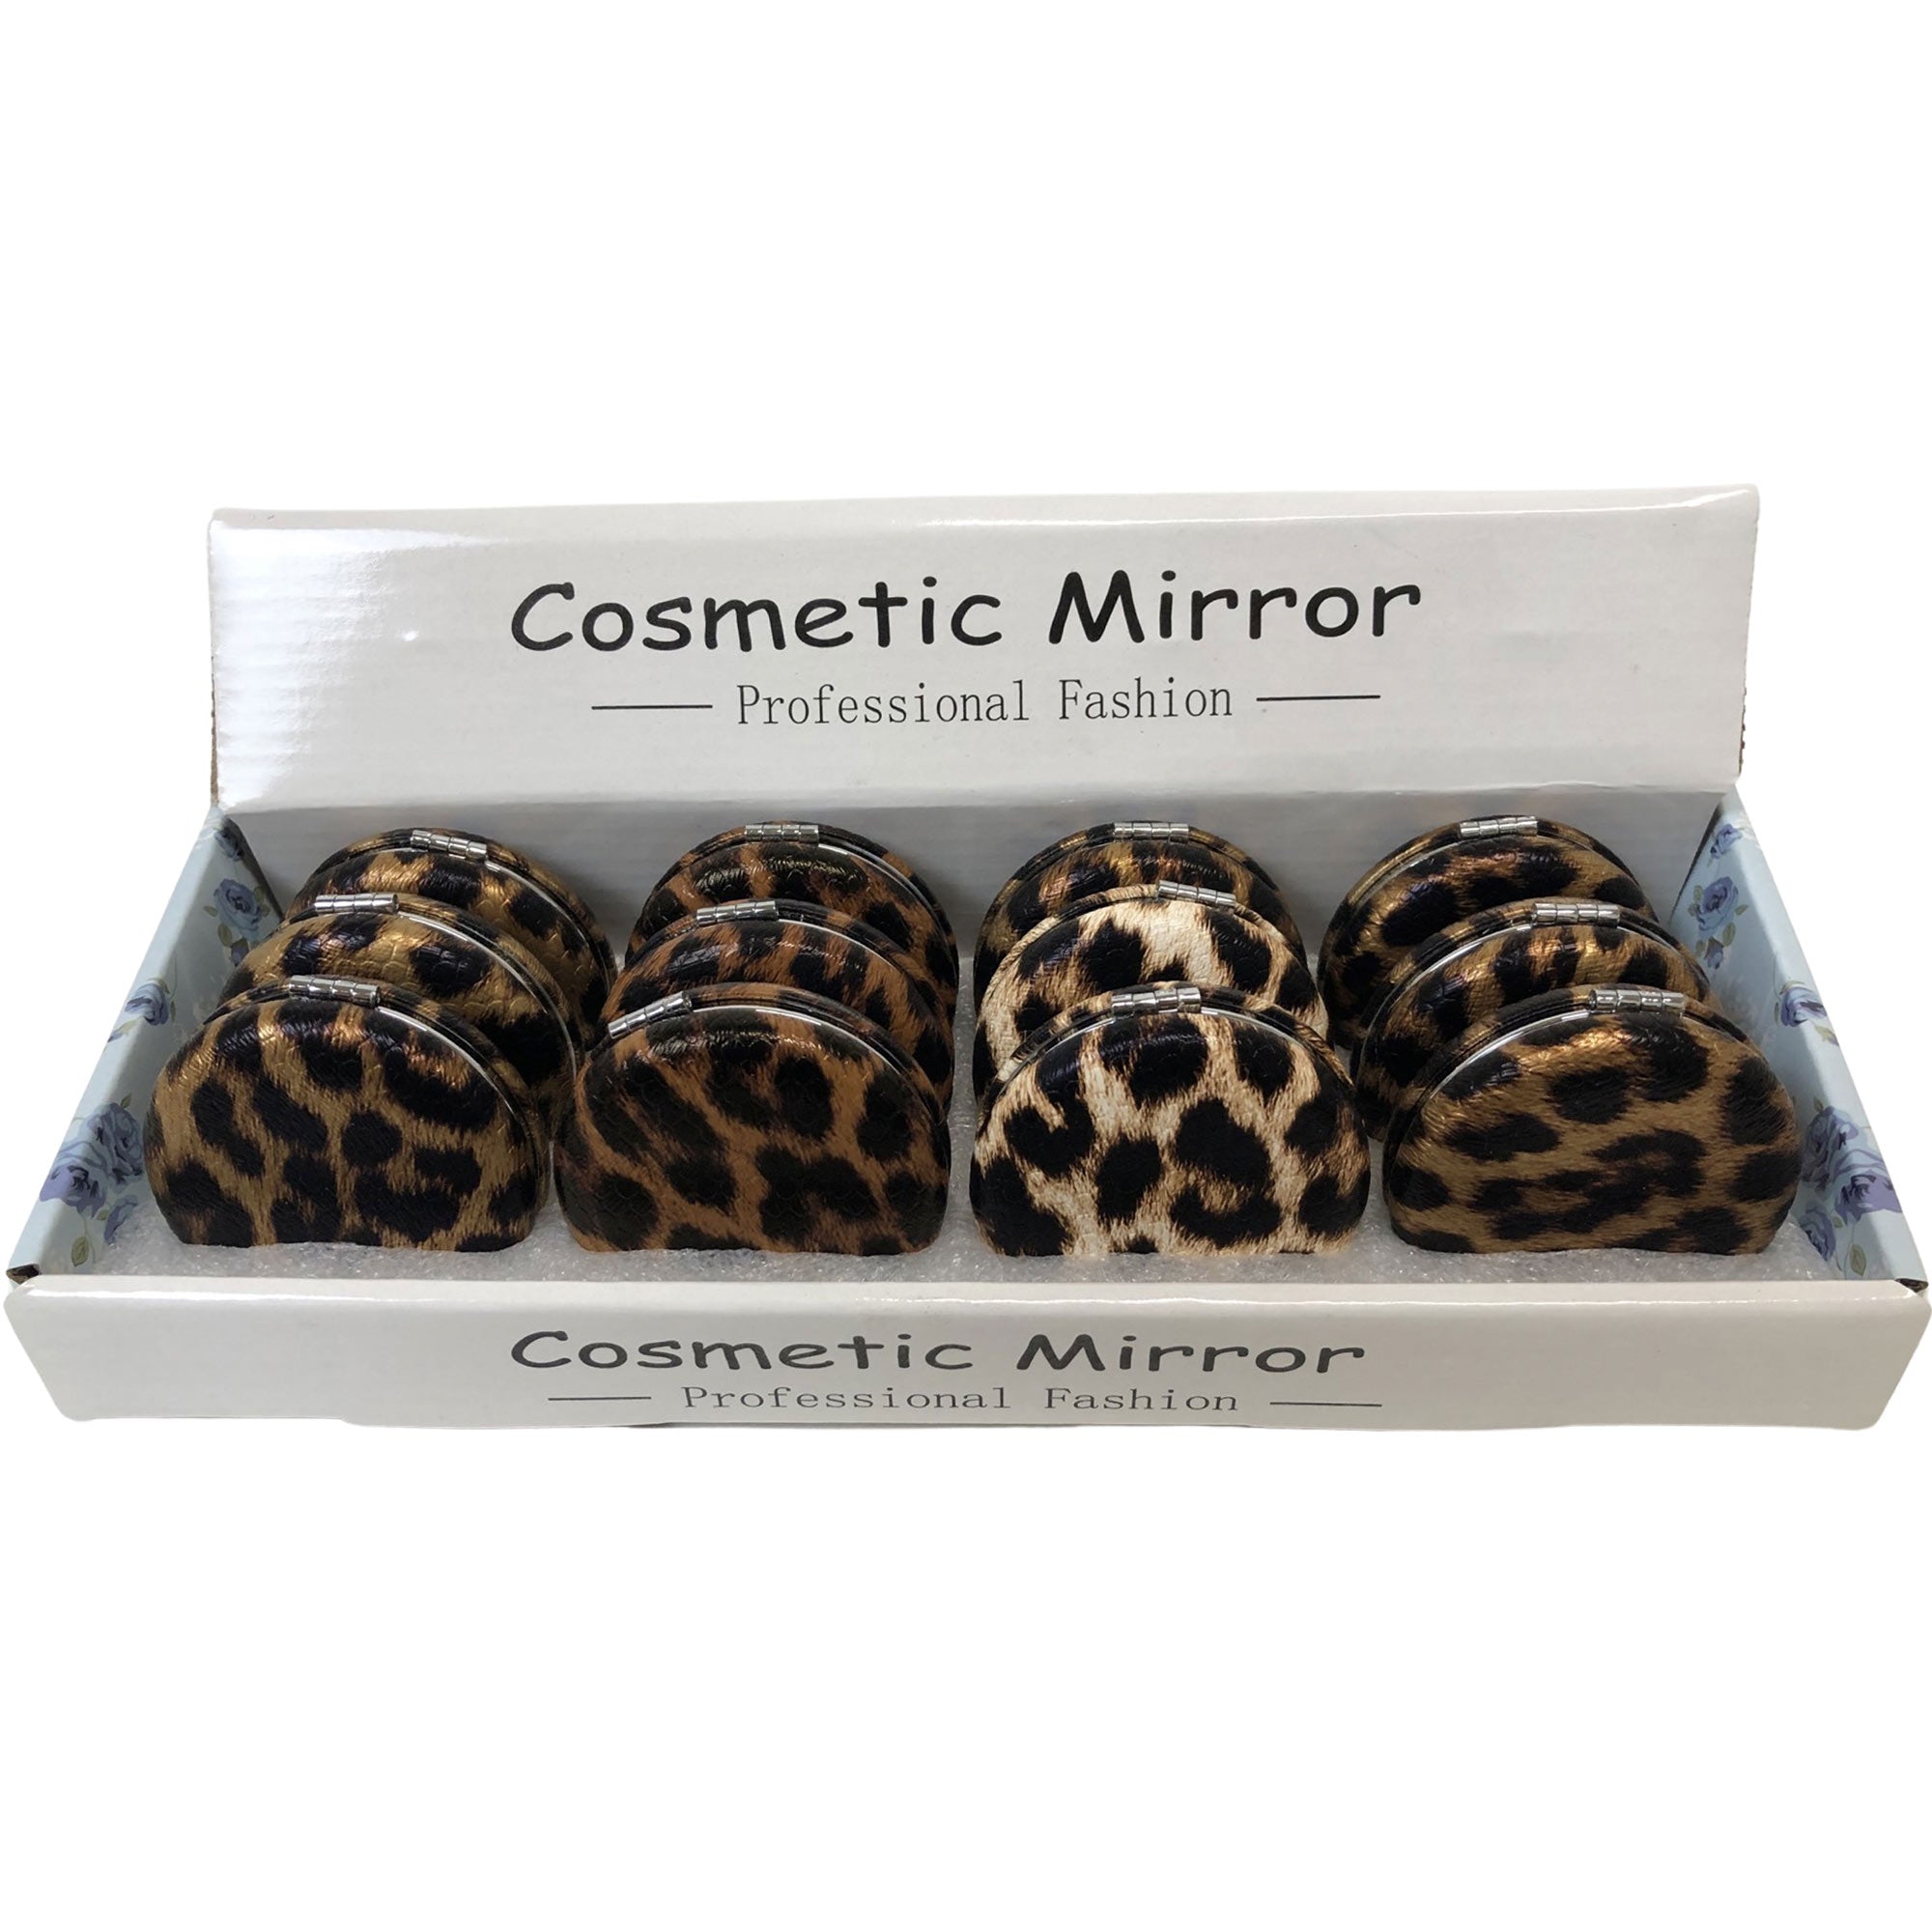 CLEARANCE ROUND COSMETIC LEOPARD PRINTS (CASE OF 48 - $1.50 / PIECE)  Wholesale Cosmetic Mirrors in Assorted Prints SKU: 909-LEO-48